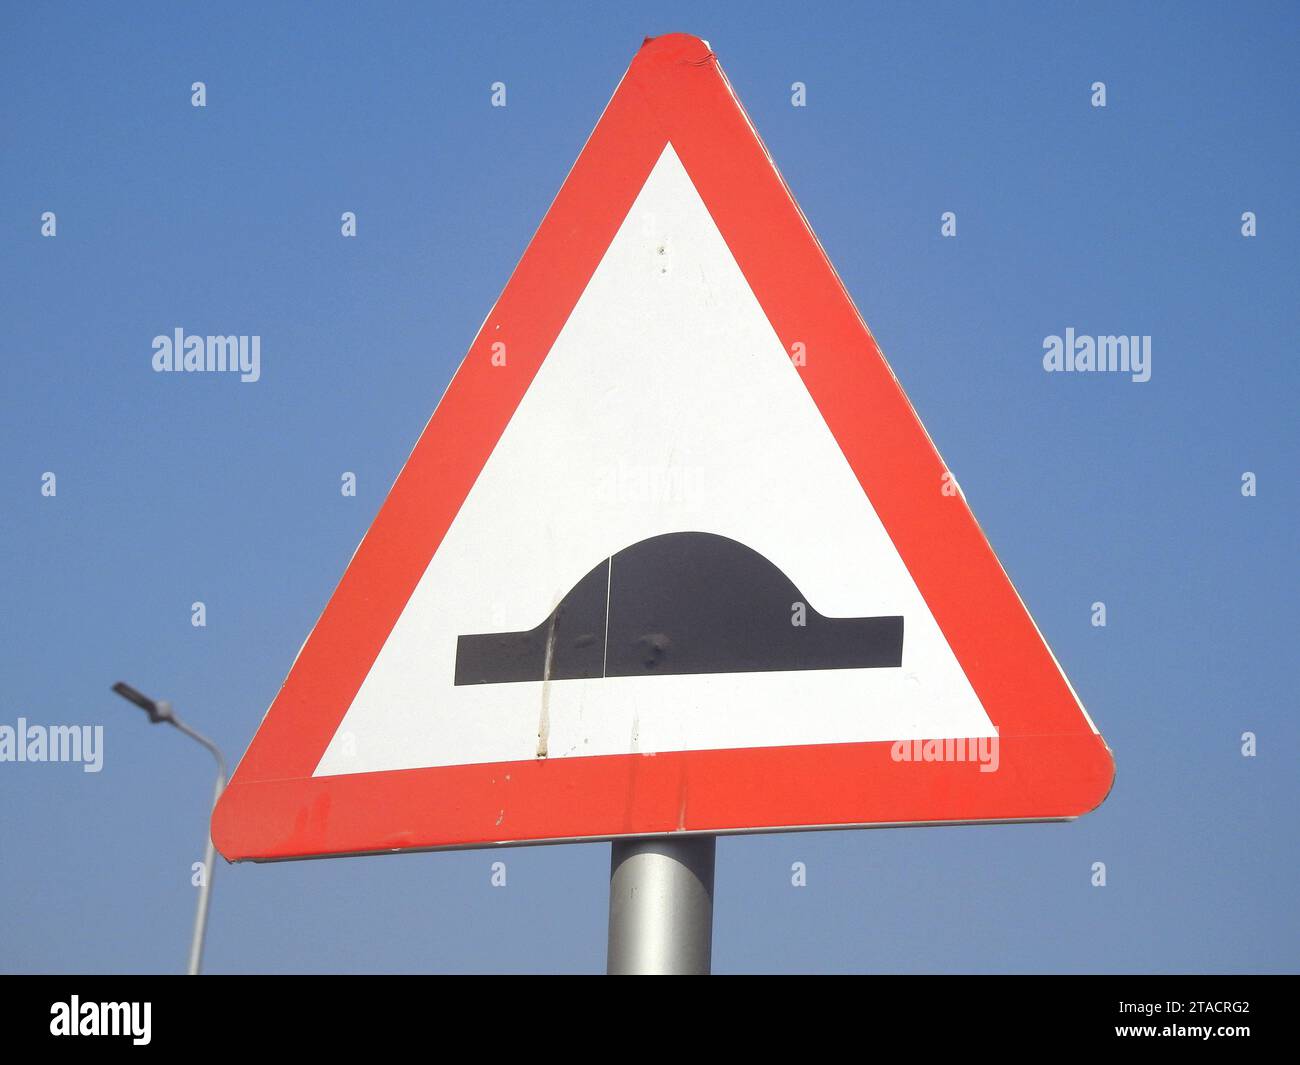 A signboard for Speed bumps ahead, to warn the drivers to be careful and slow down, traffic thresholds, breakers or sleeping policemen, a class of tra Stock Photo